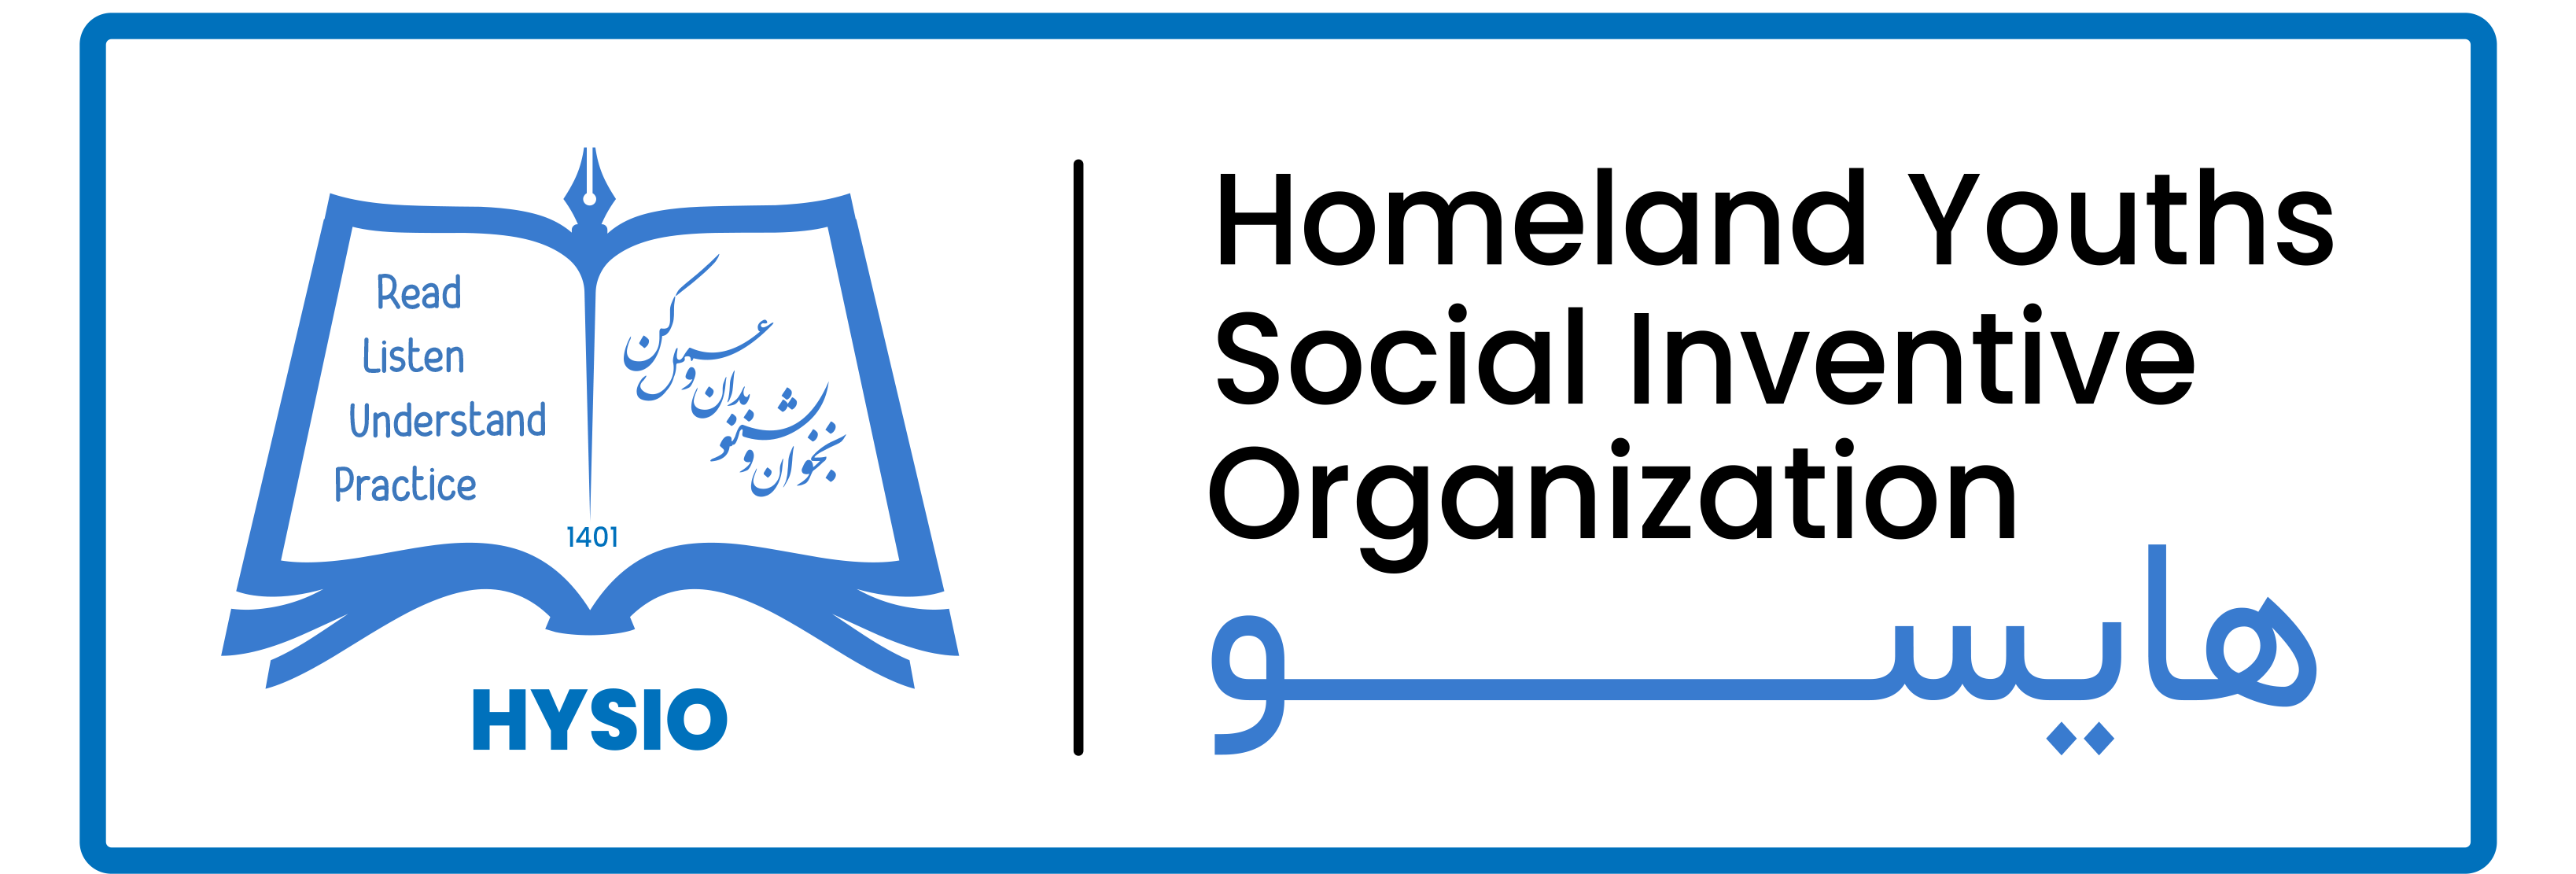 The Homeland Youths Social Inventive Organization